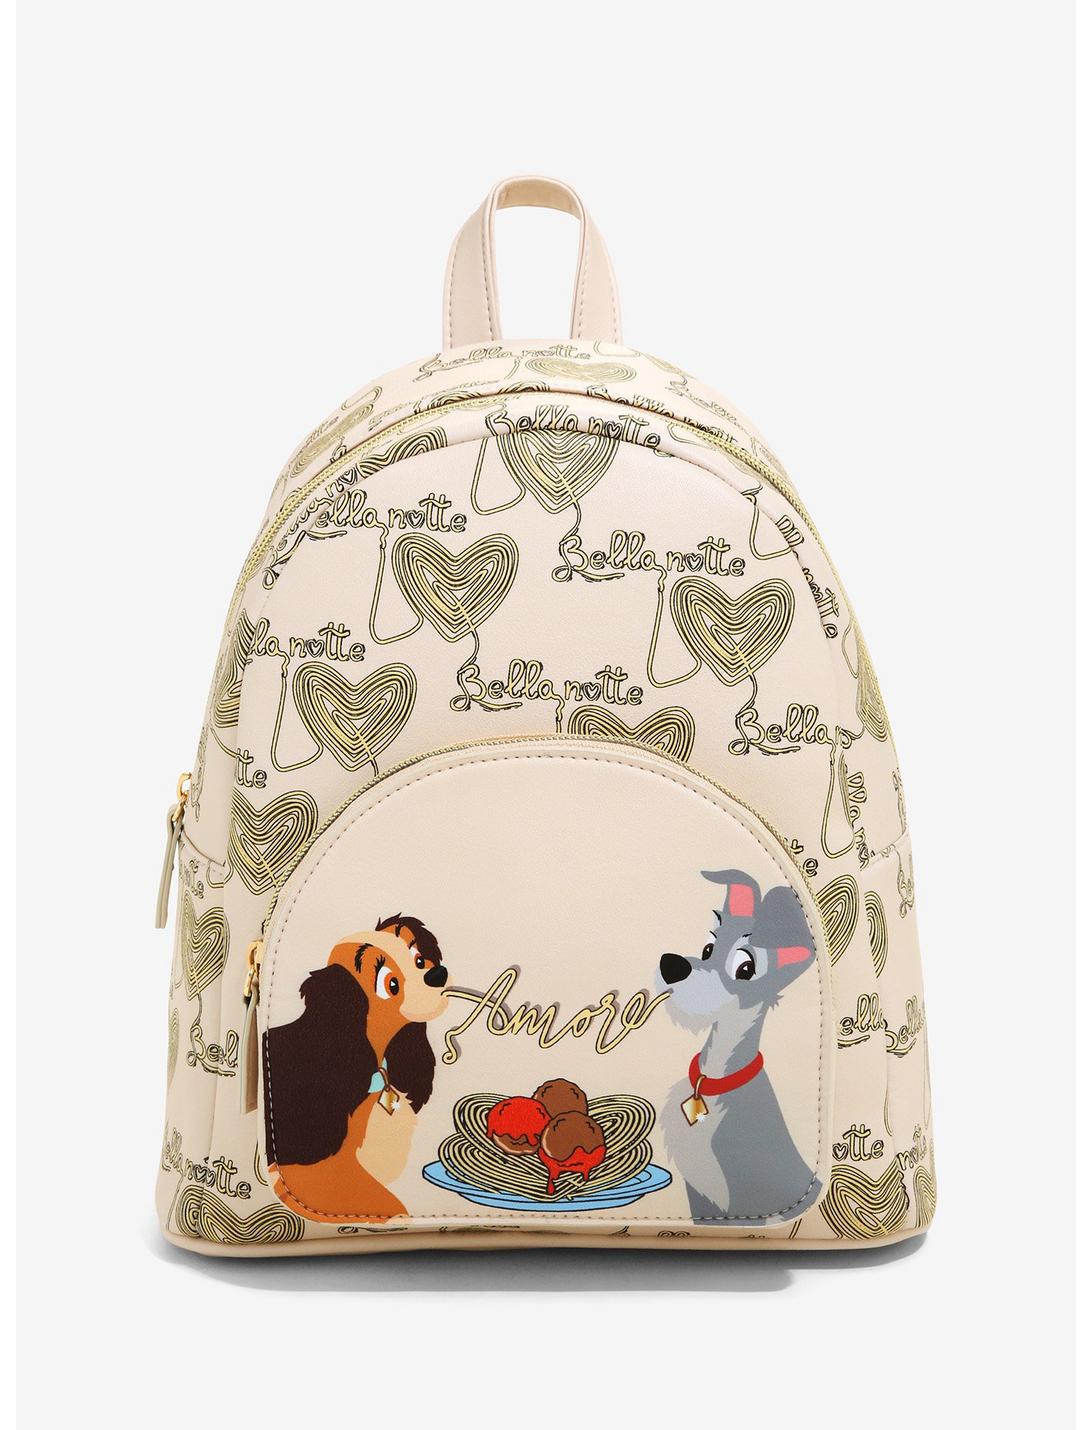 Details about   Loungefly Disney Lady and the Tramp Spaghetti Mini Backpack New With Tags 